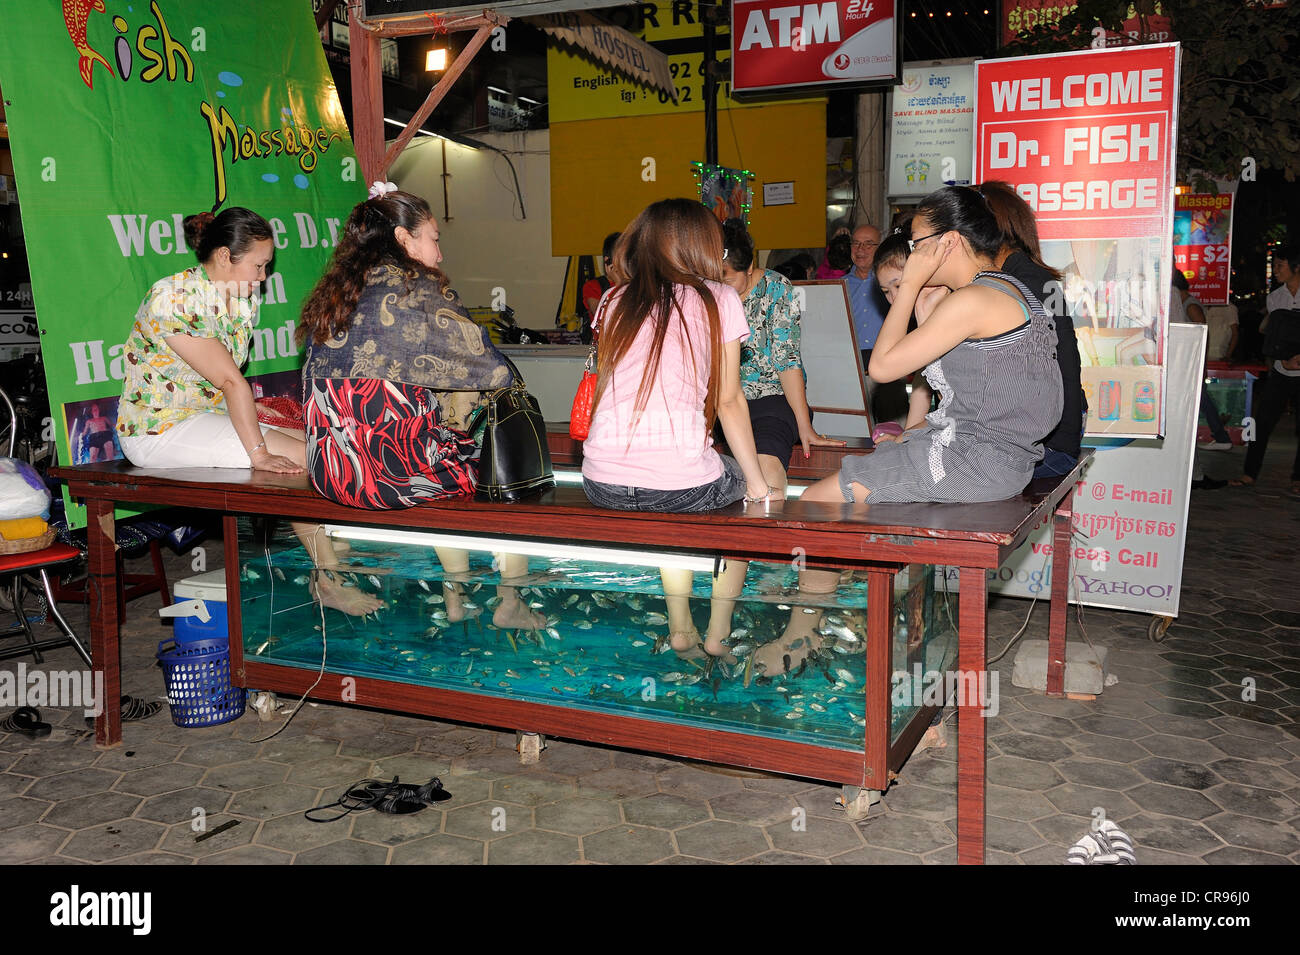 Khmer women getting a foot massage from doctor fish at the roadside, Siem Reap, Cambodia, Southeast Asia, Asia Stock Photo